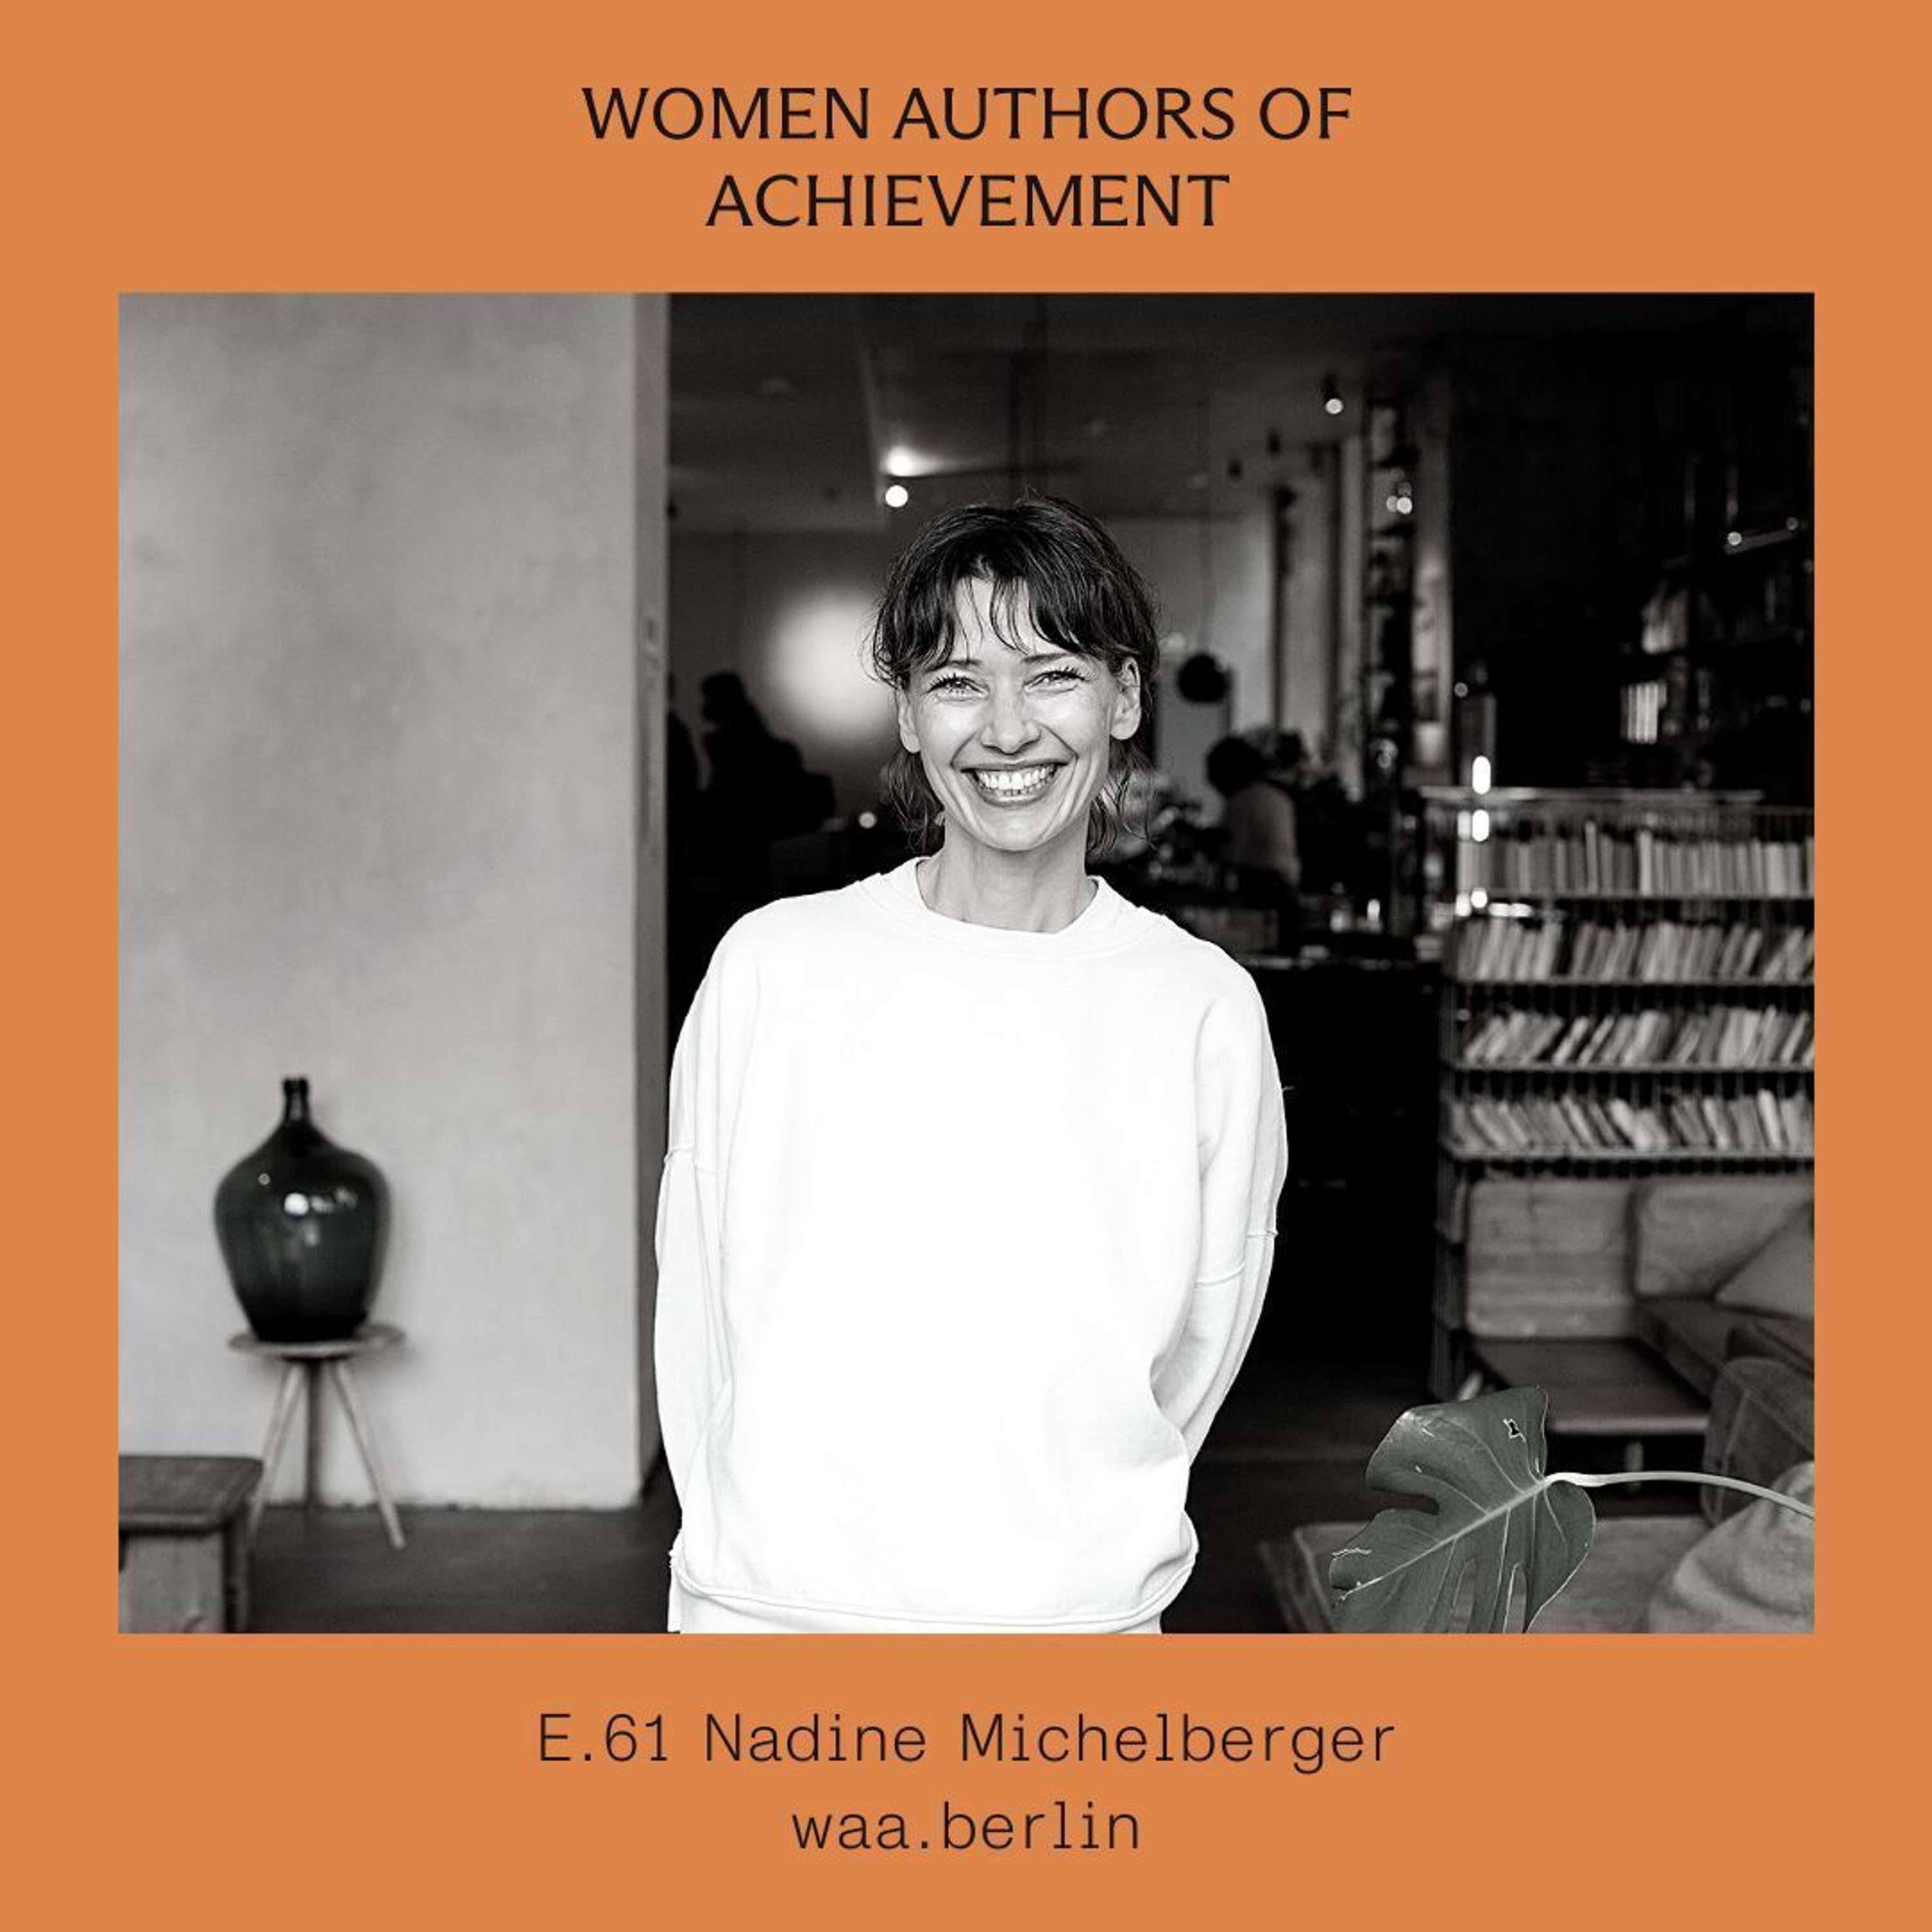 E.61 Michelberger hotel and Berlin in the late 90’s – experiencing the zeitgeist with Nadine Michelberger